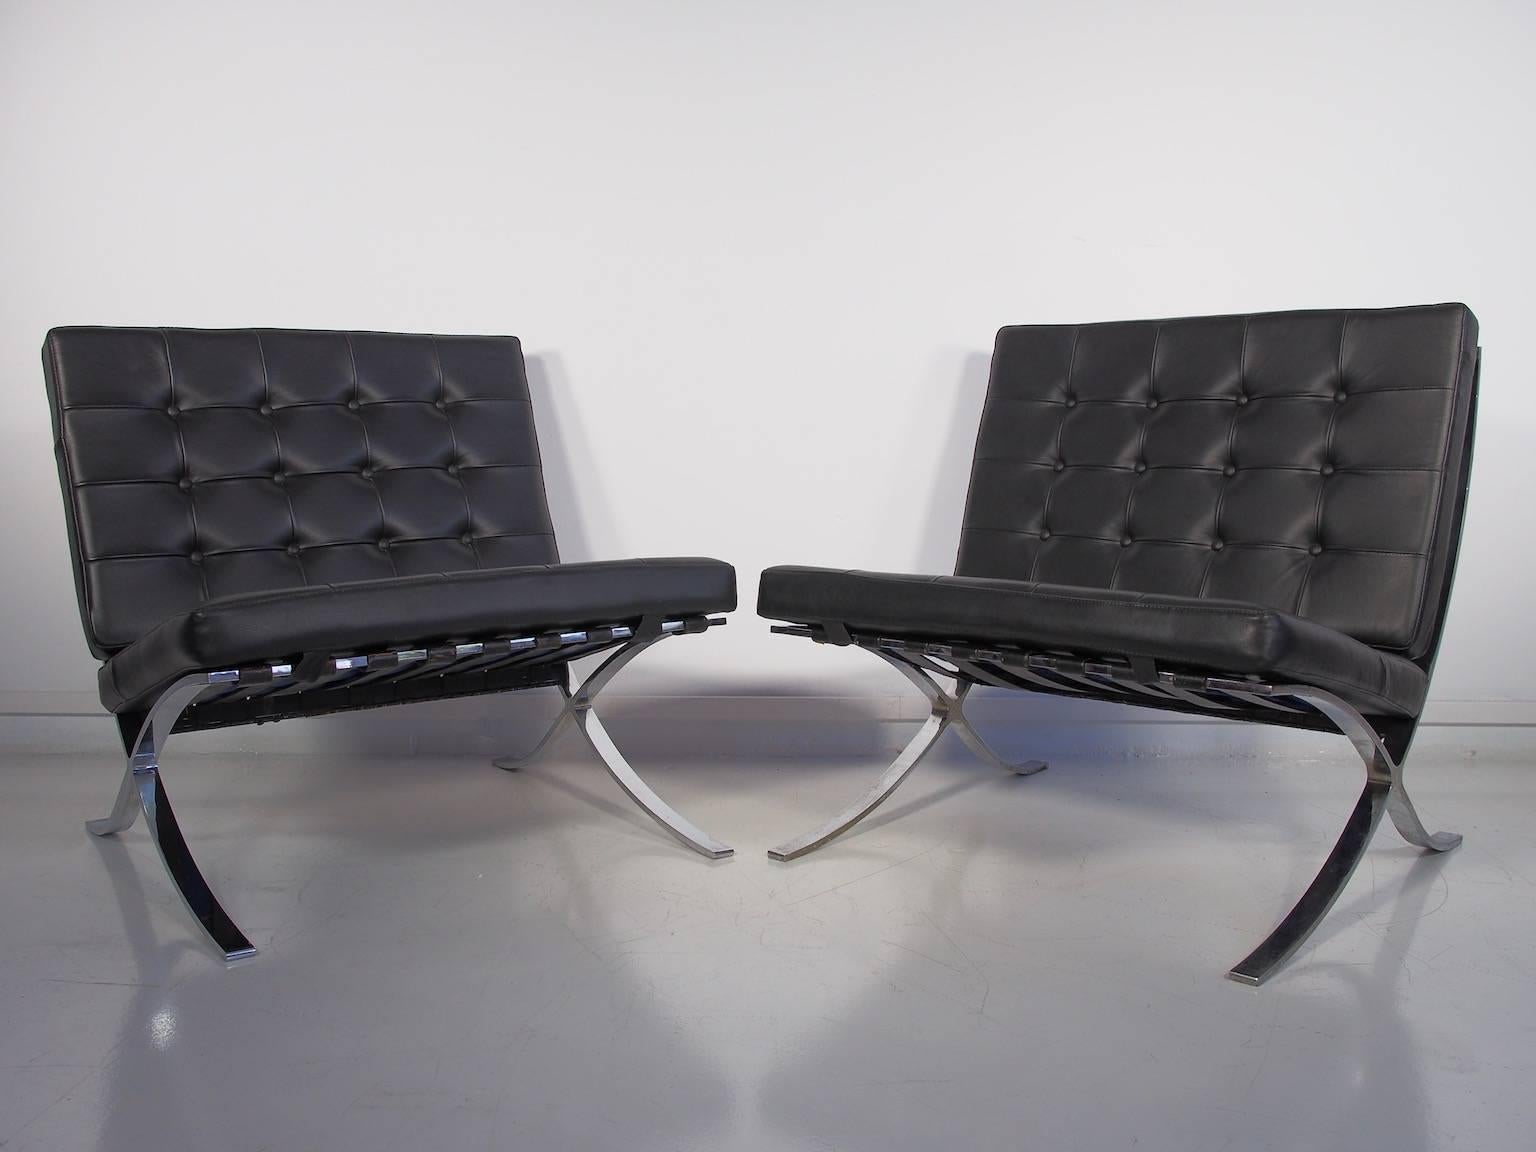 Spanish Pair of Barcelona Black Leather Lounge Chairs by Ludwig Mies van der Rohe